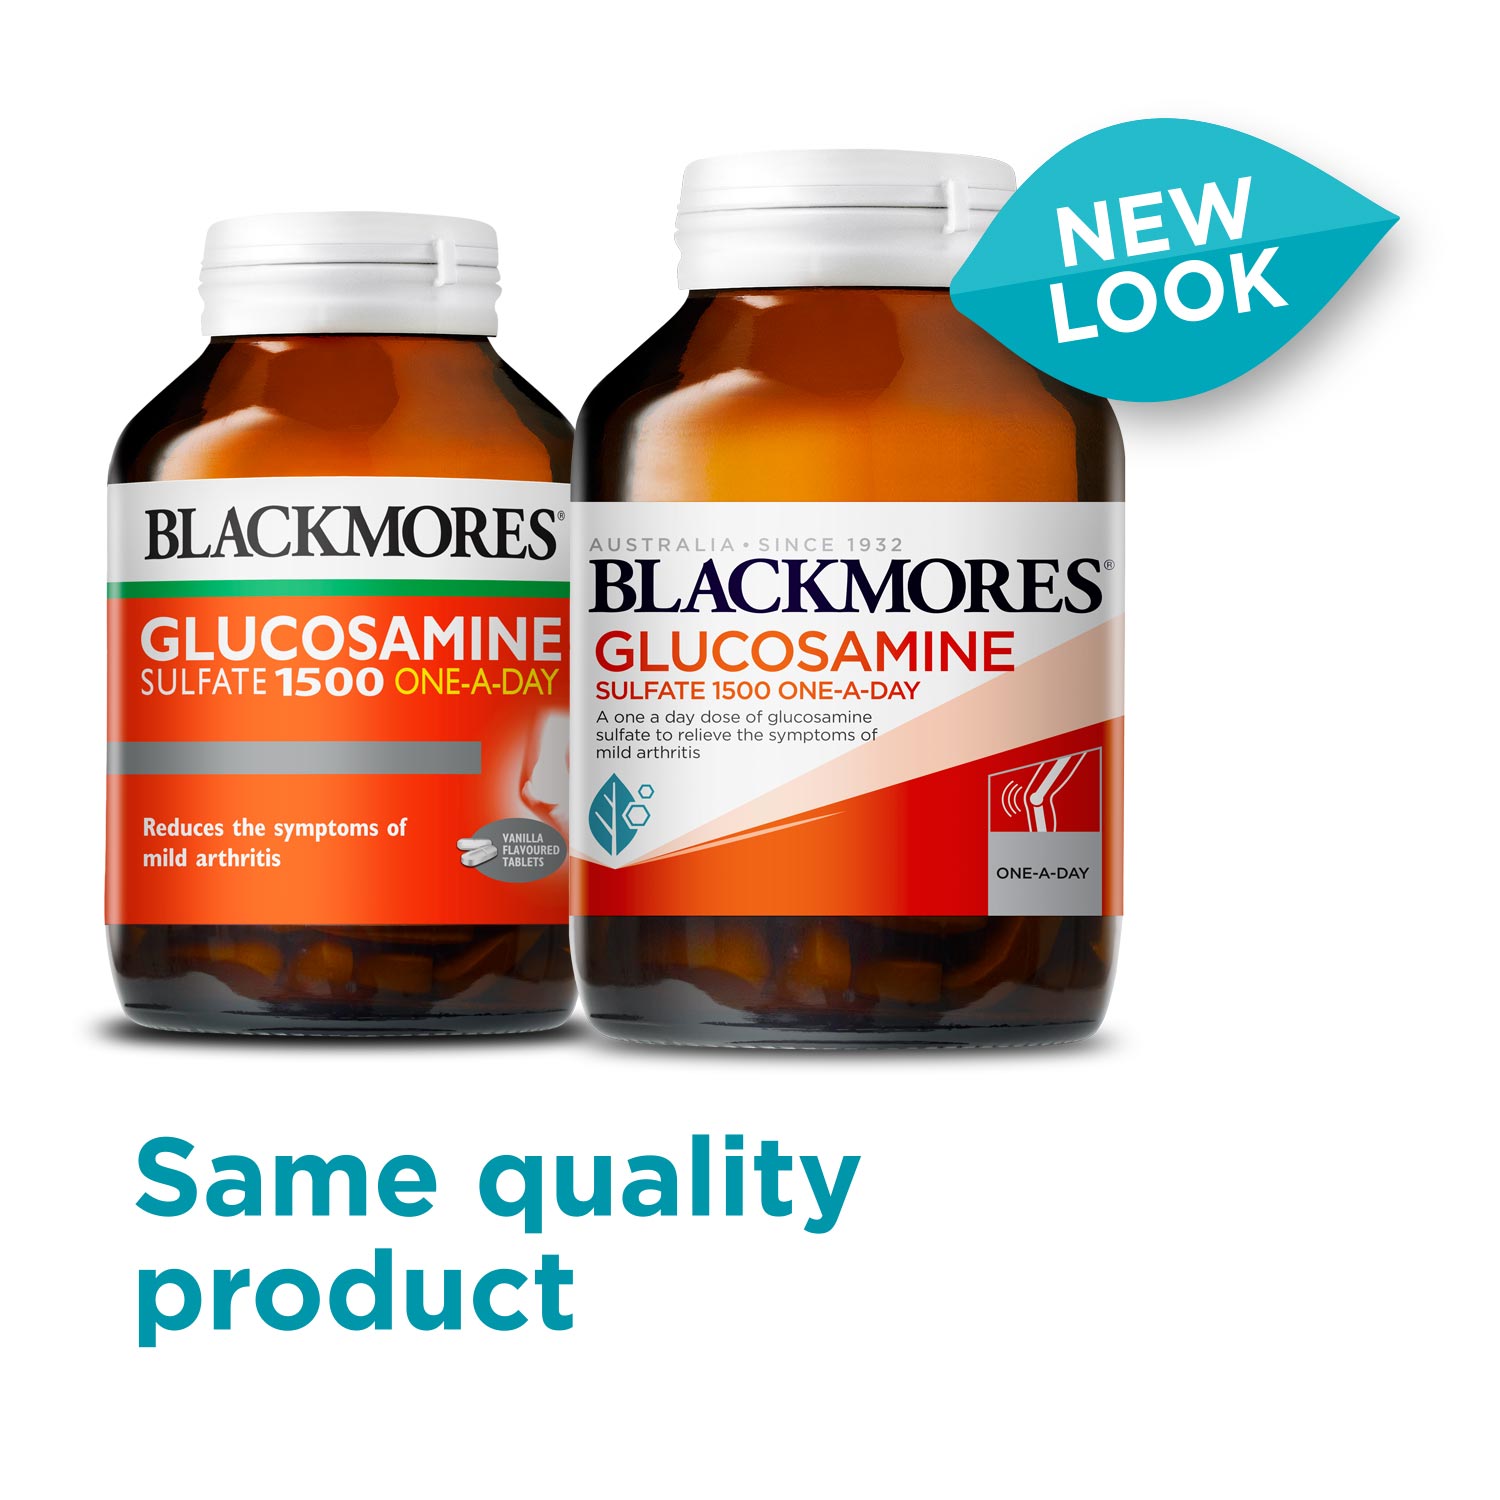 Blackmores Glucosamine Sulfate 1500 One-A-Day new look label 90 tabs